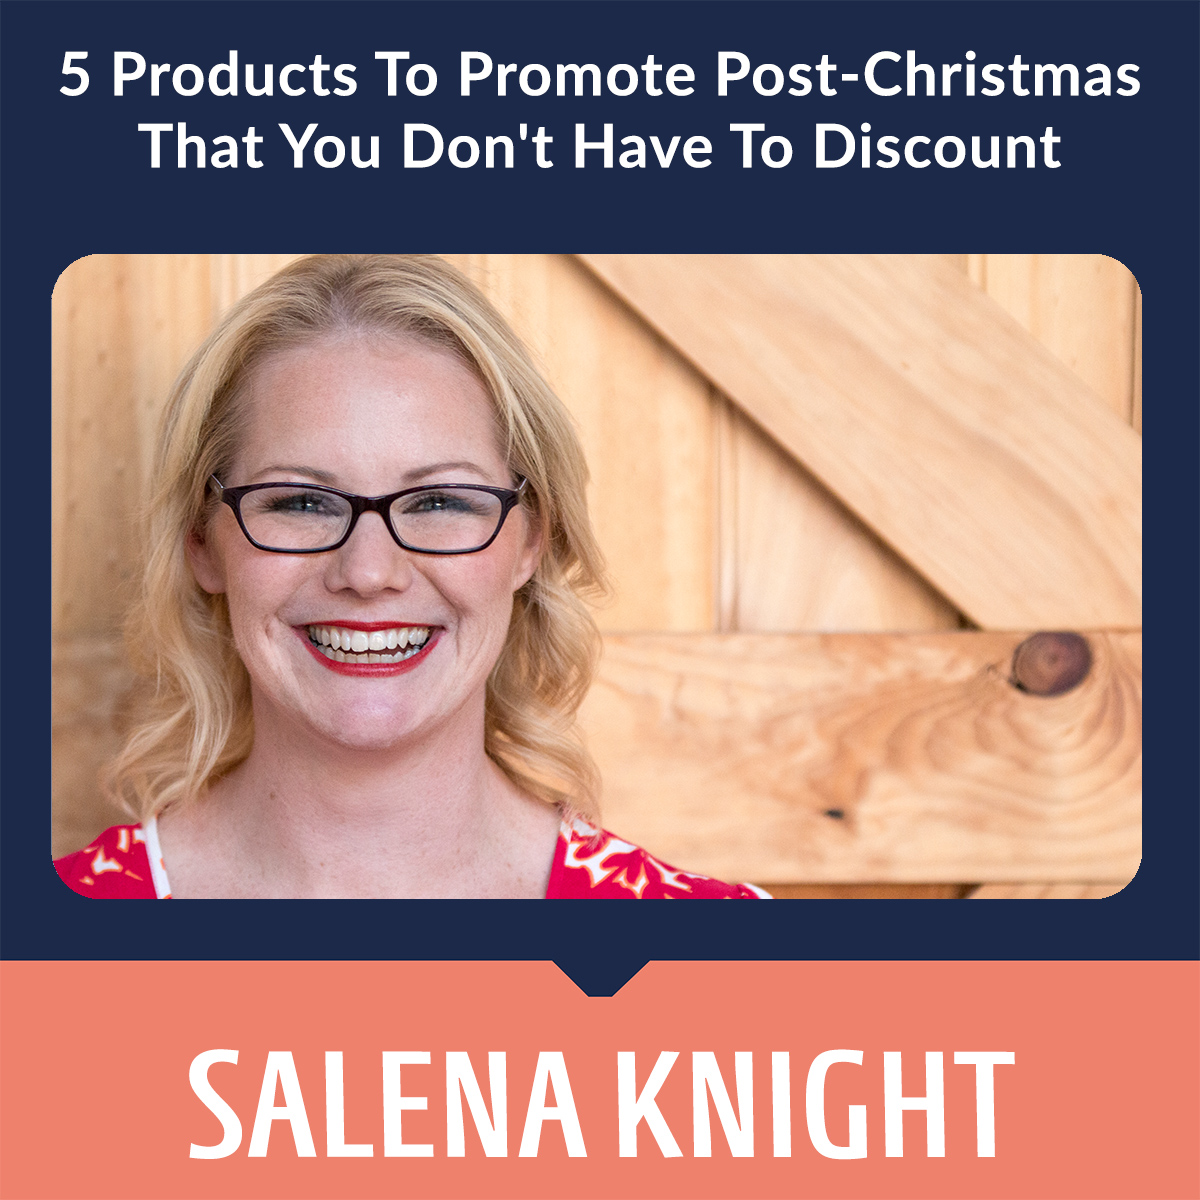 5_Products_To_Promote_Post-Christmas_That_You_Dont_Have_To_Discount_sqr